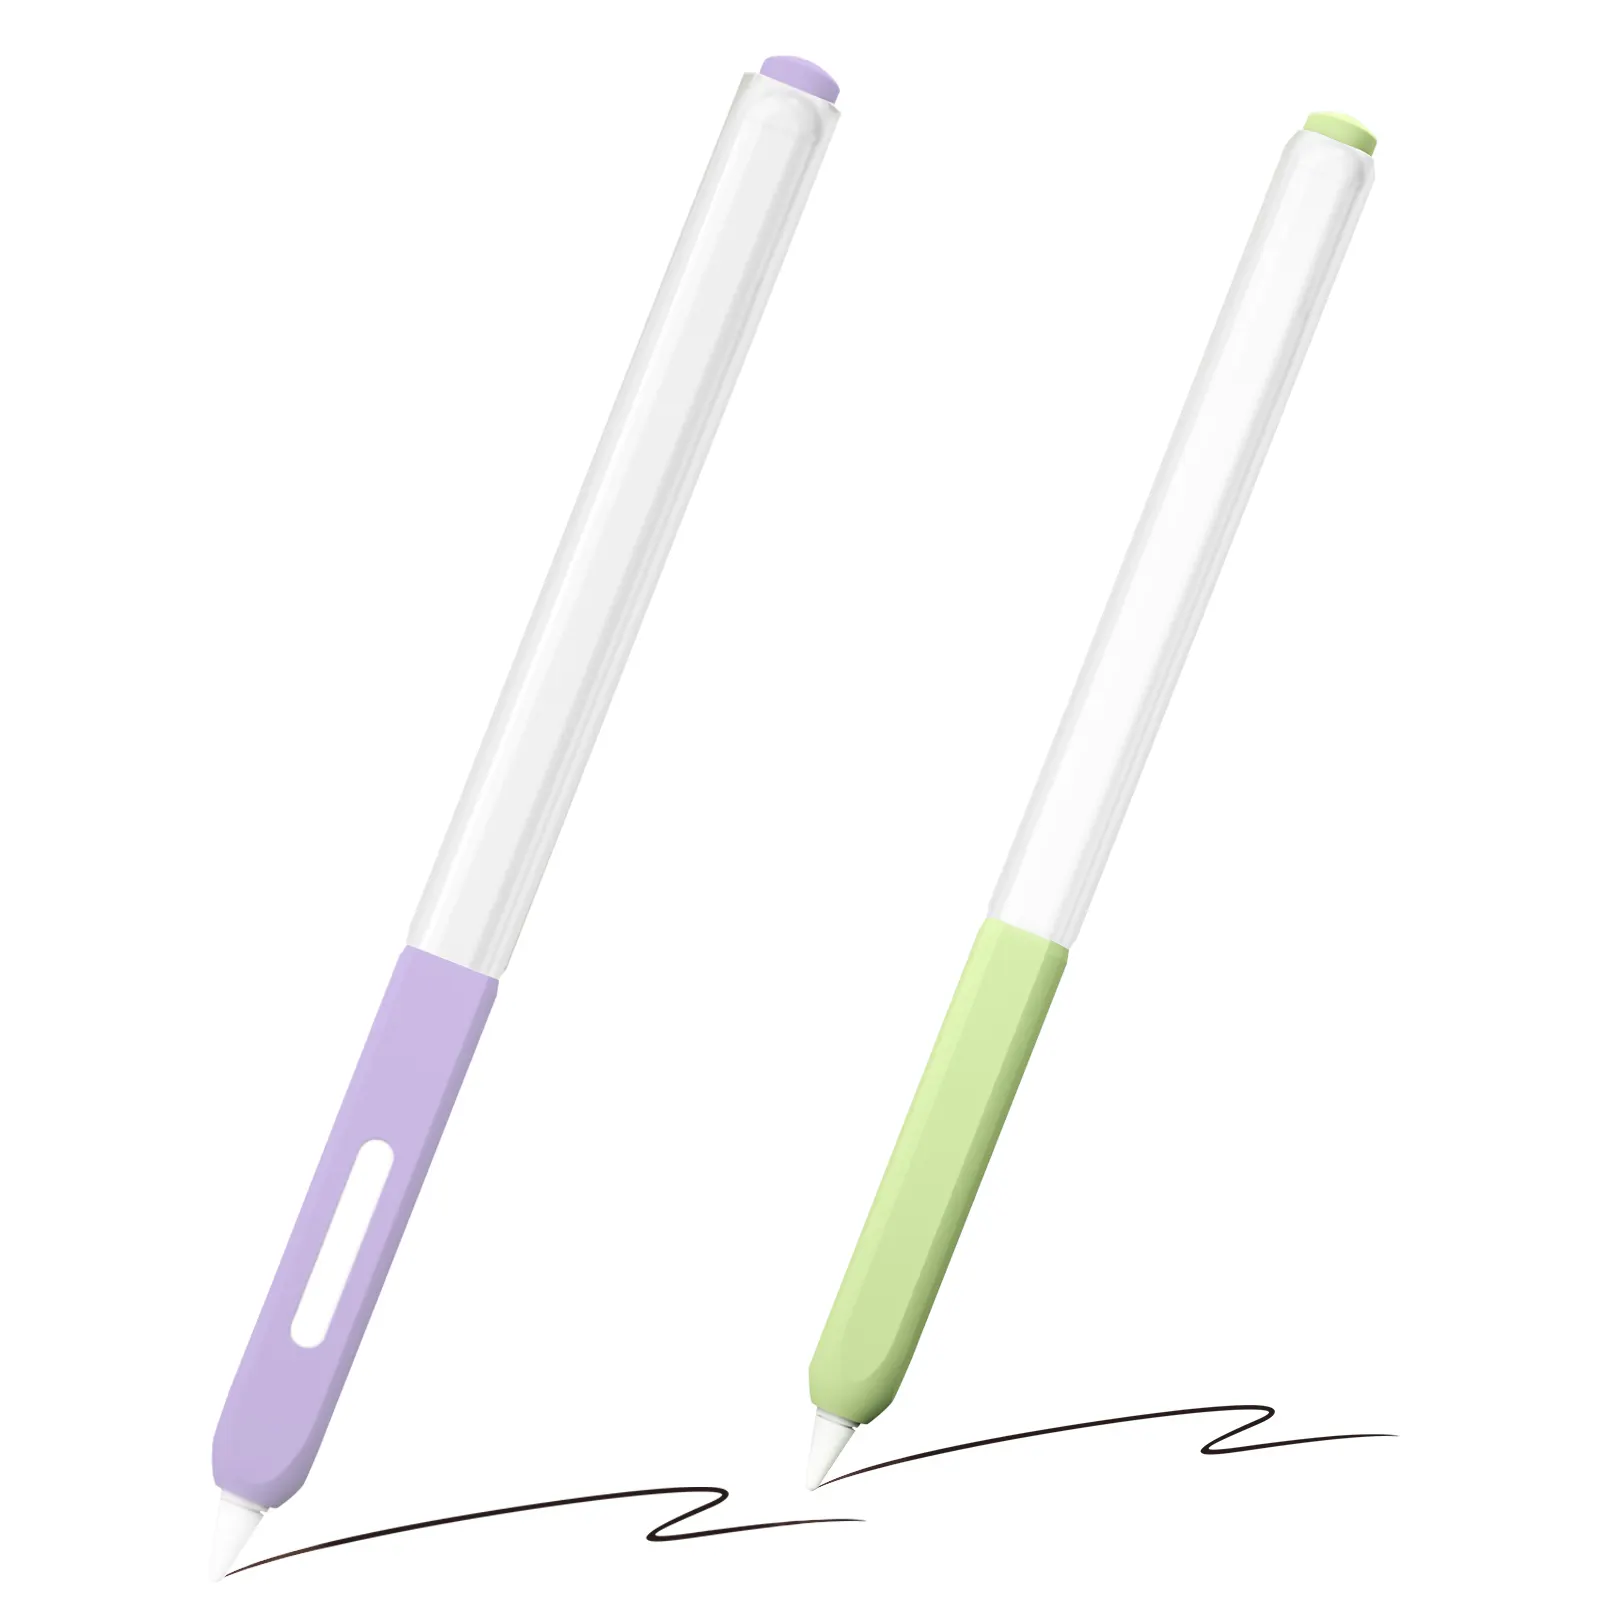 New Lightweight Silicone Case for Apple Pencil 2nd Generation Protective Tip Holder for iPad Pencil 2 Stylus Stylus Case